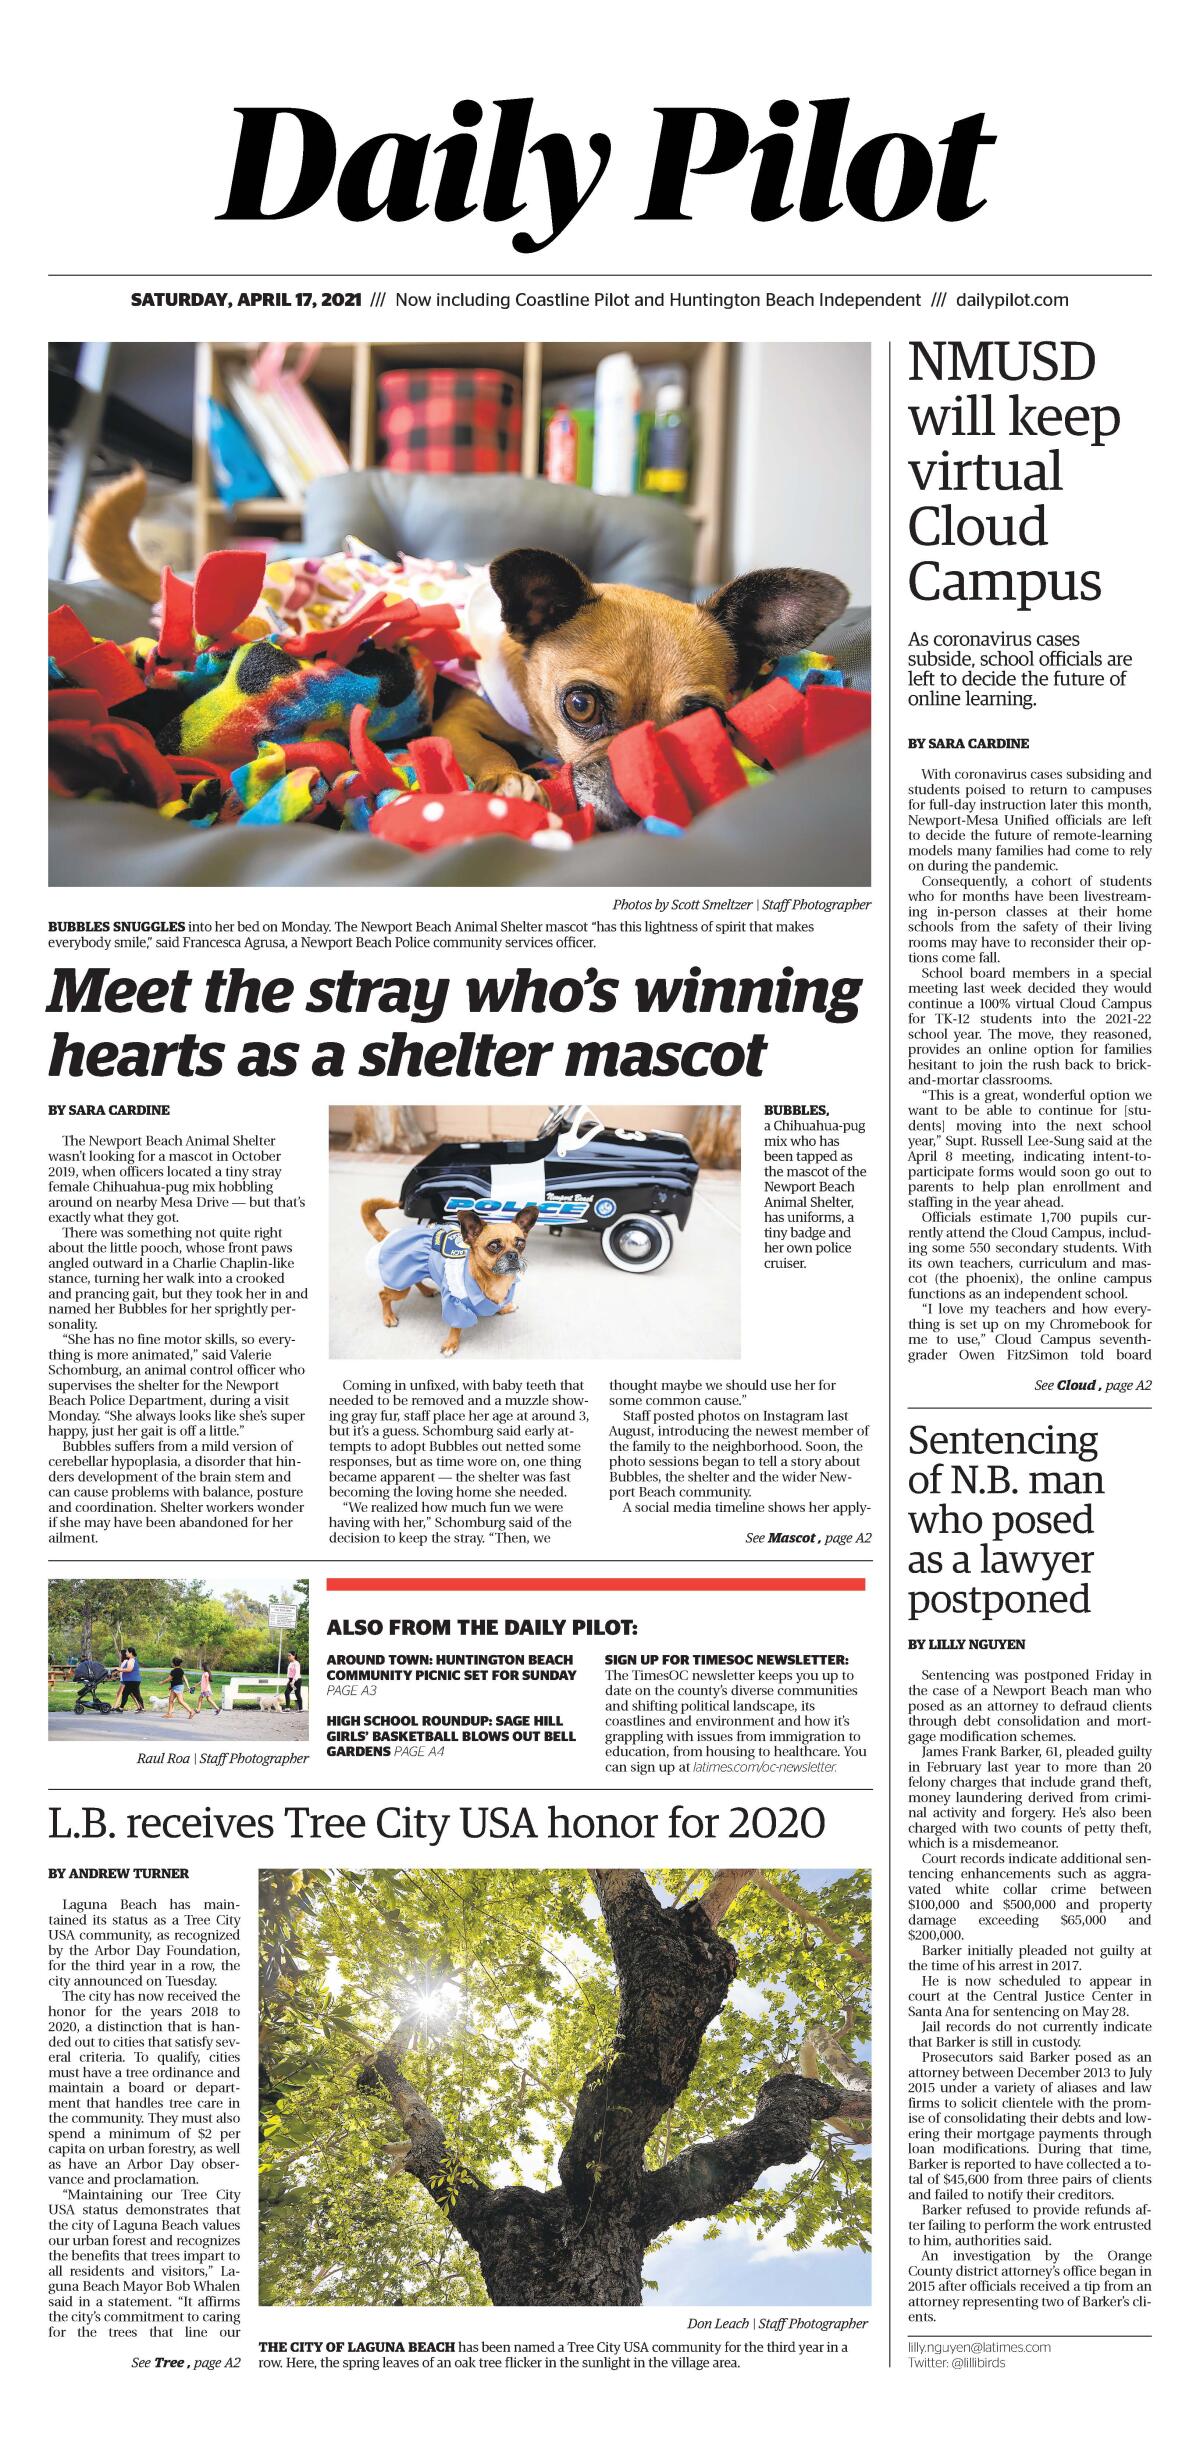 Front page of Daily Pilot e-newspaper for Saturday, April 17, 2021.